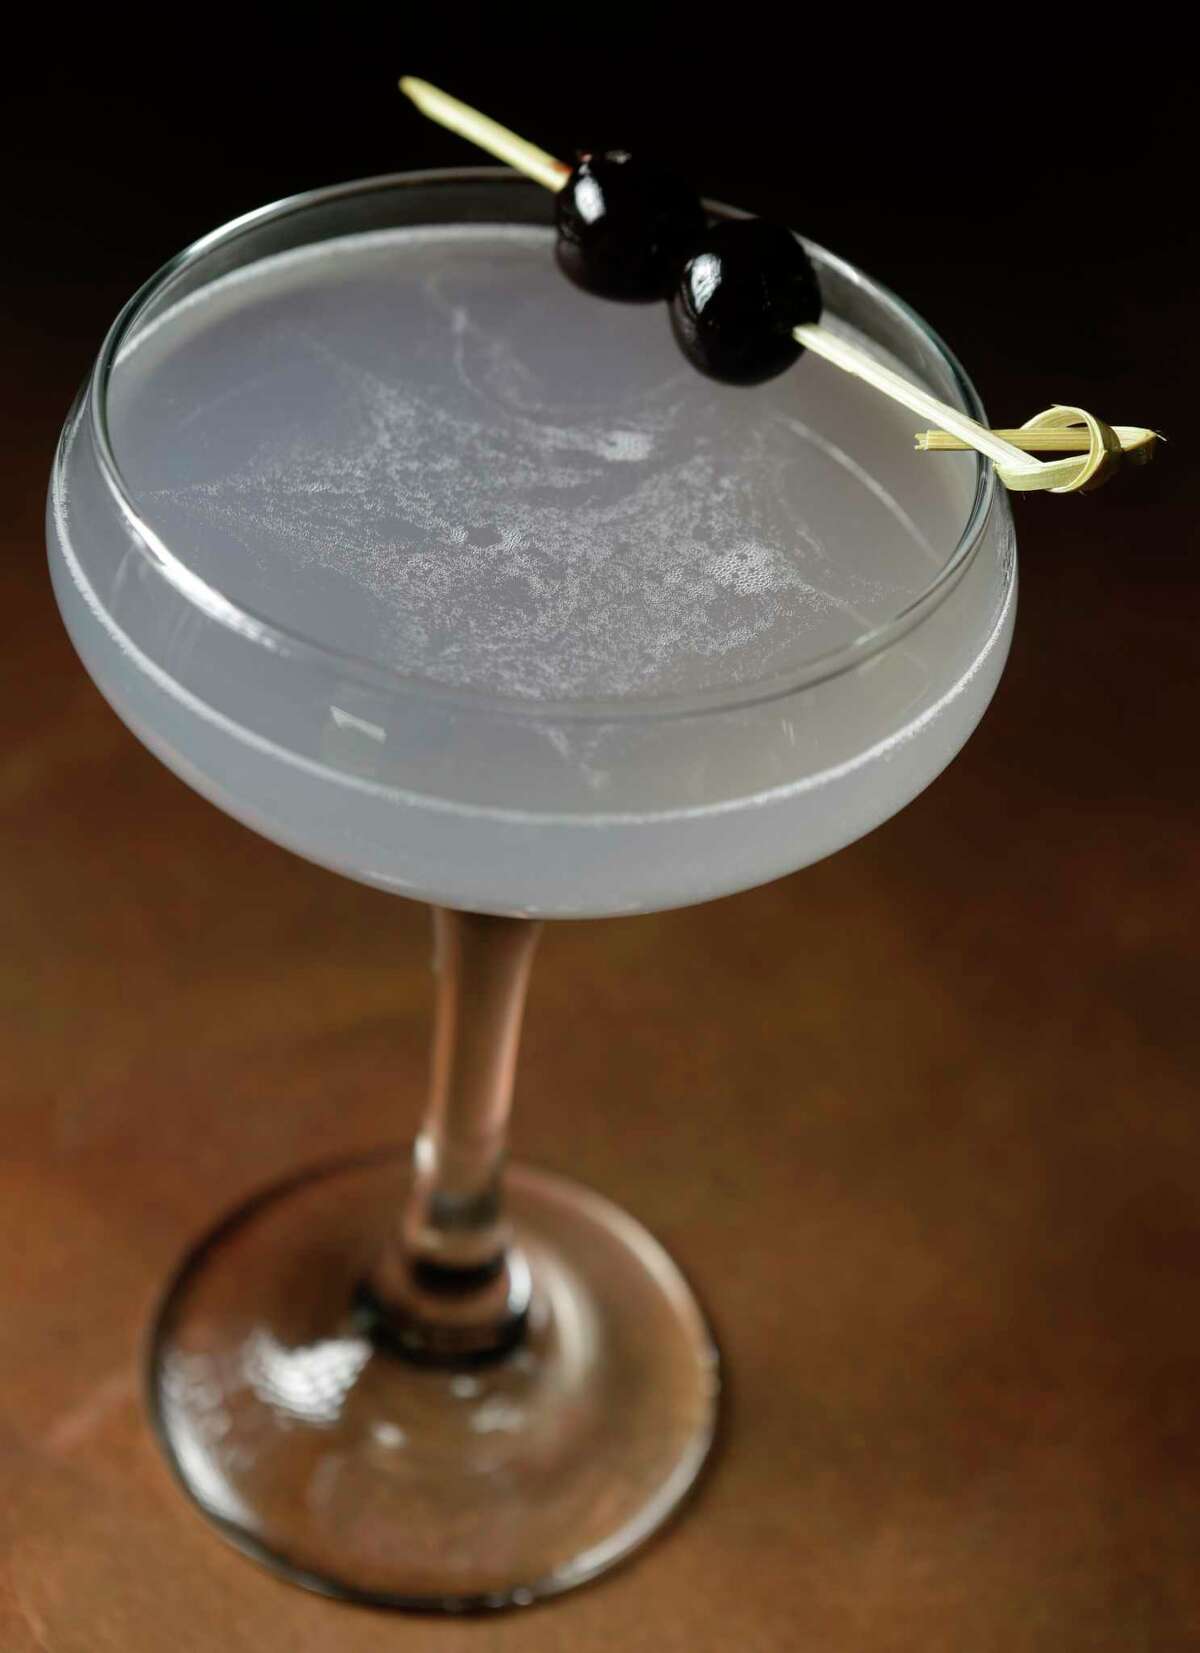 The Rip Tide (made with gin, maraschino liqueur and creme de violette) is a signature cocktail at Field & Tides.